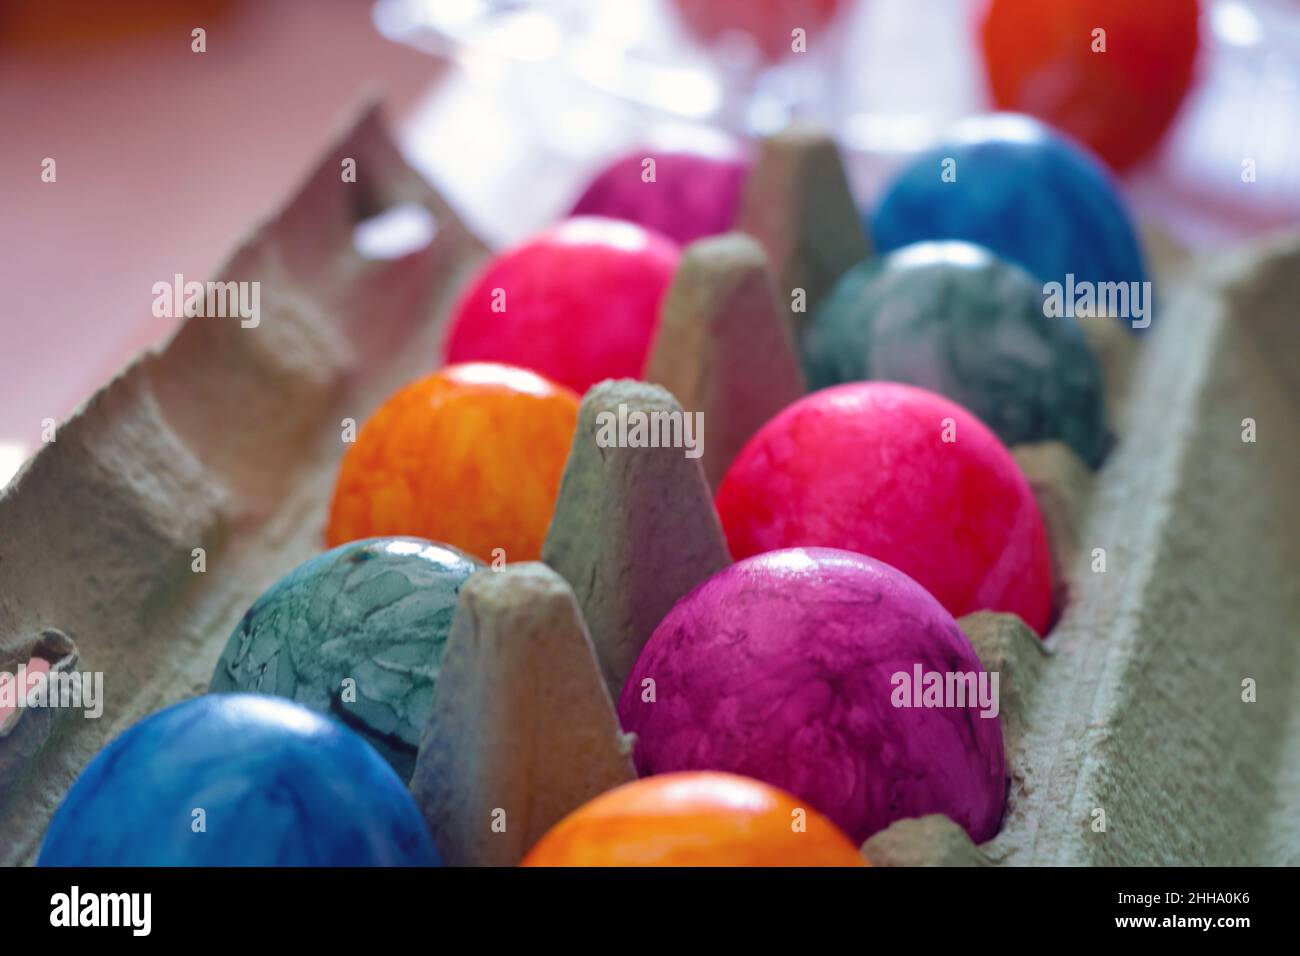 Out of focus. Easter colorful eggs are in a cardboard box Stock Photo